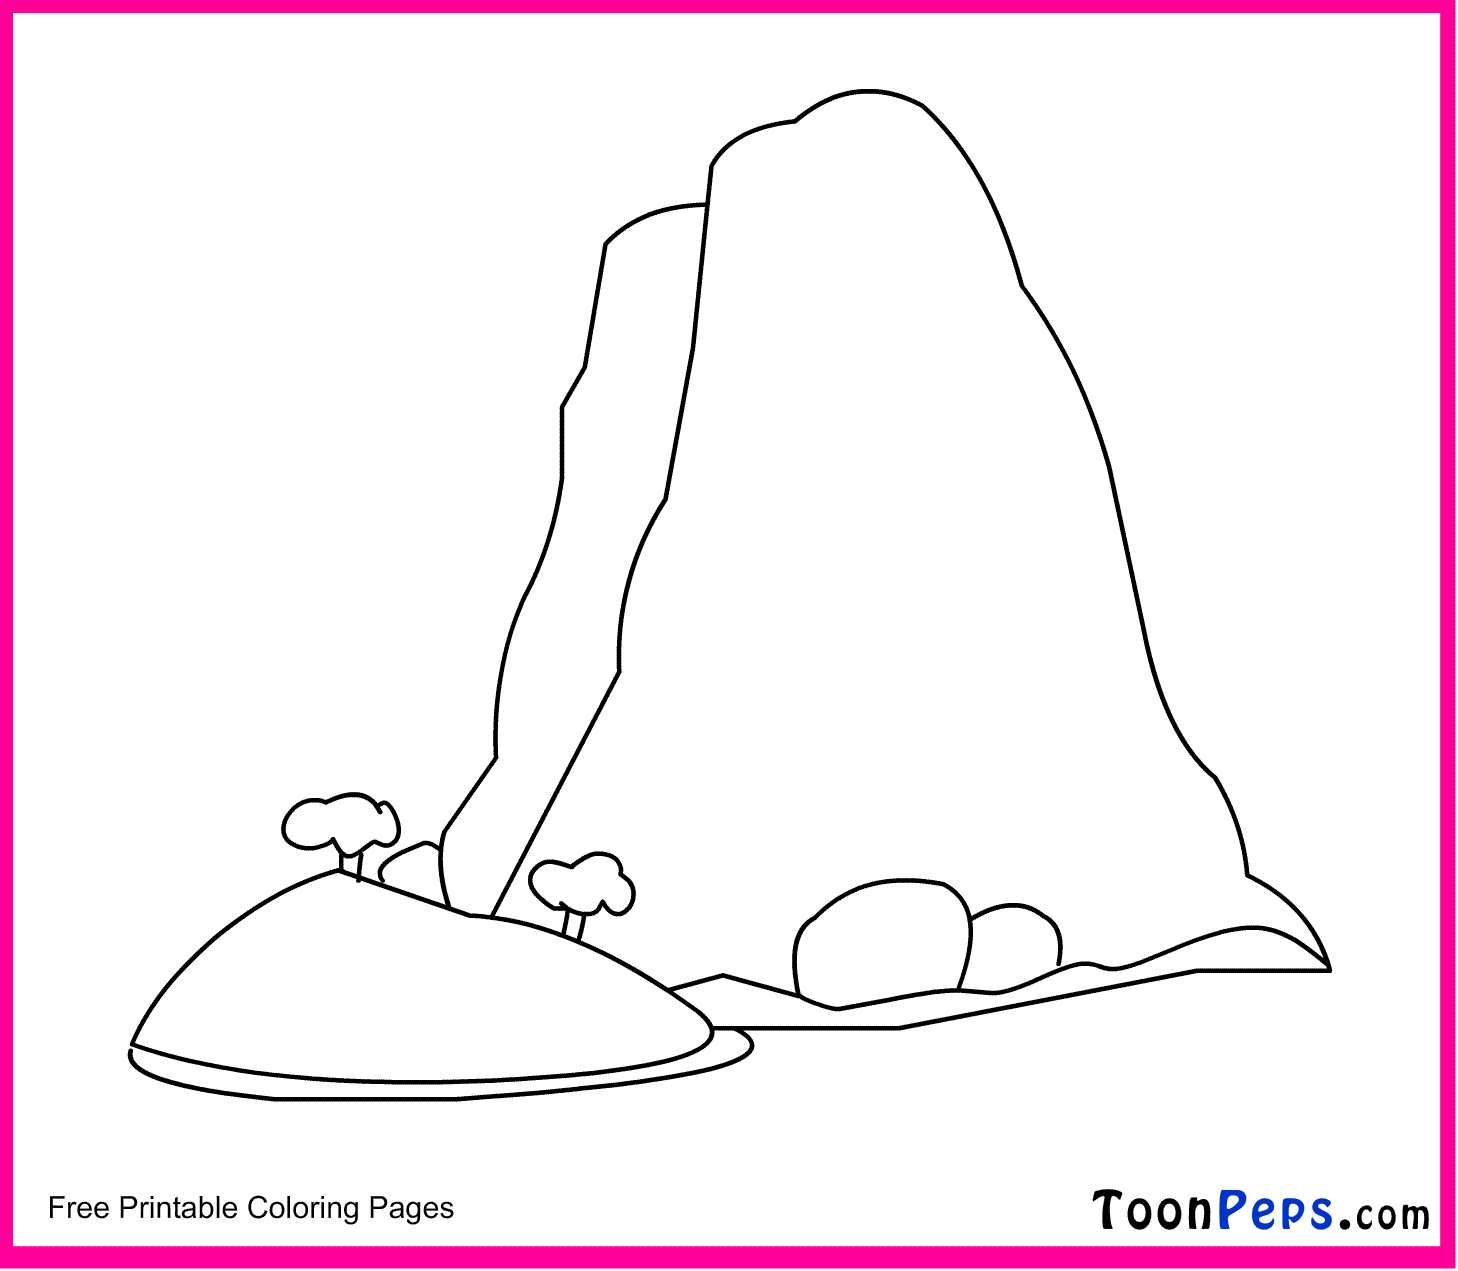 Toonpeps : Free Printable Mountain coloring pages for kids